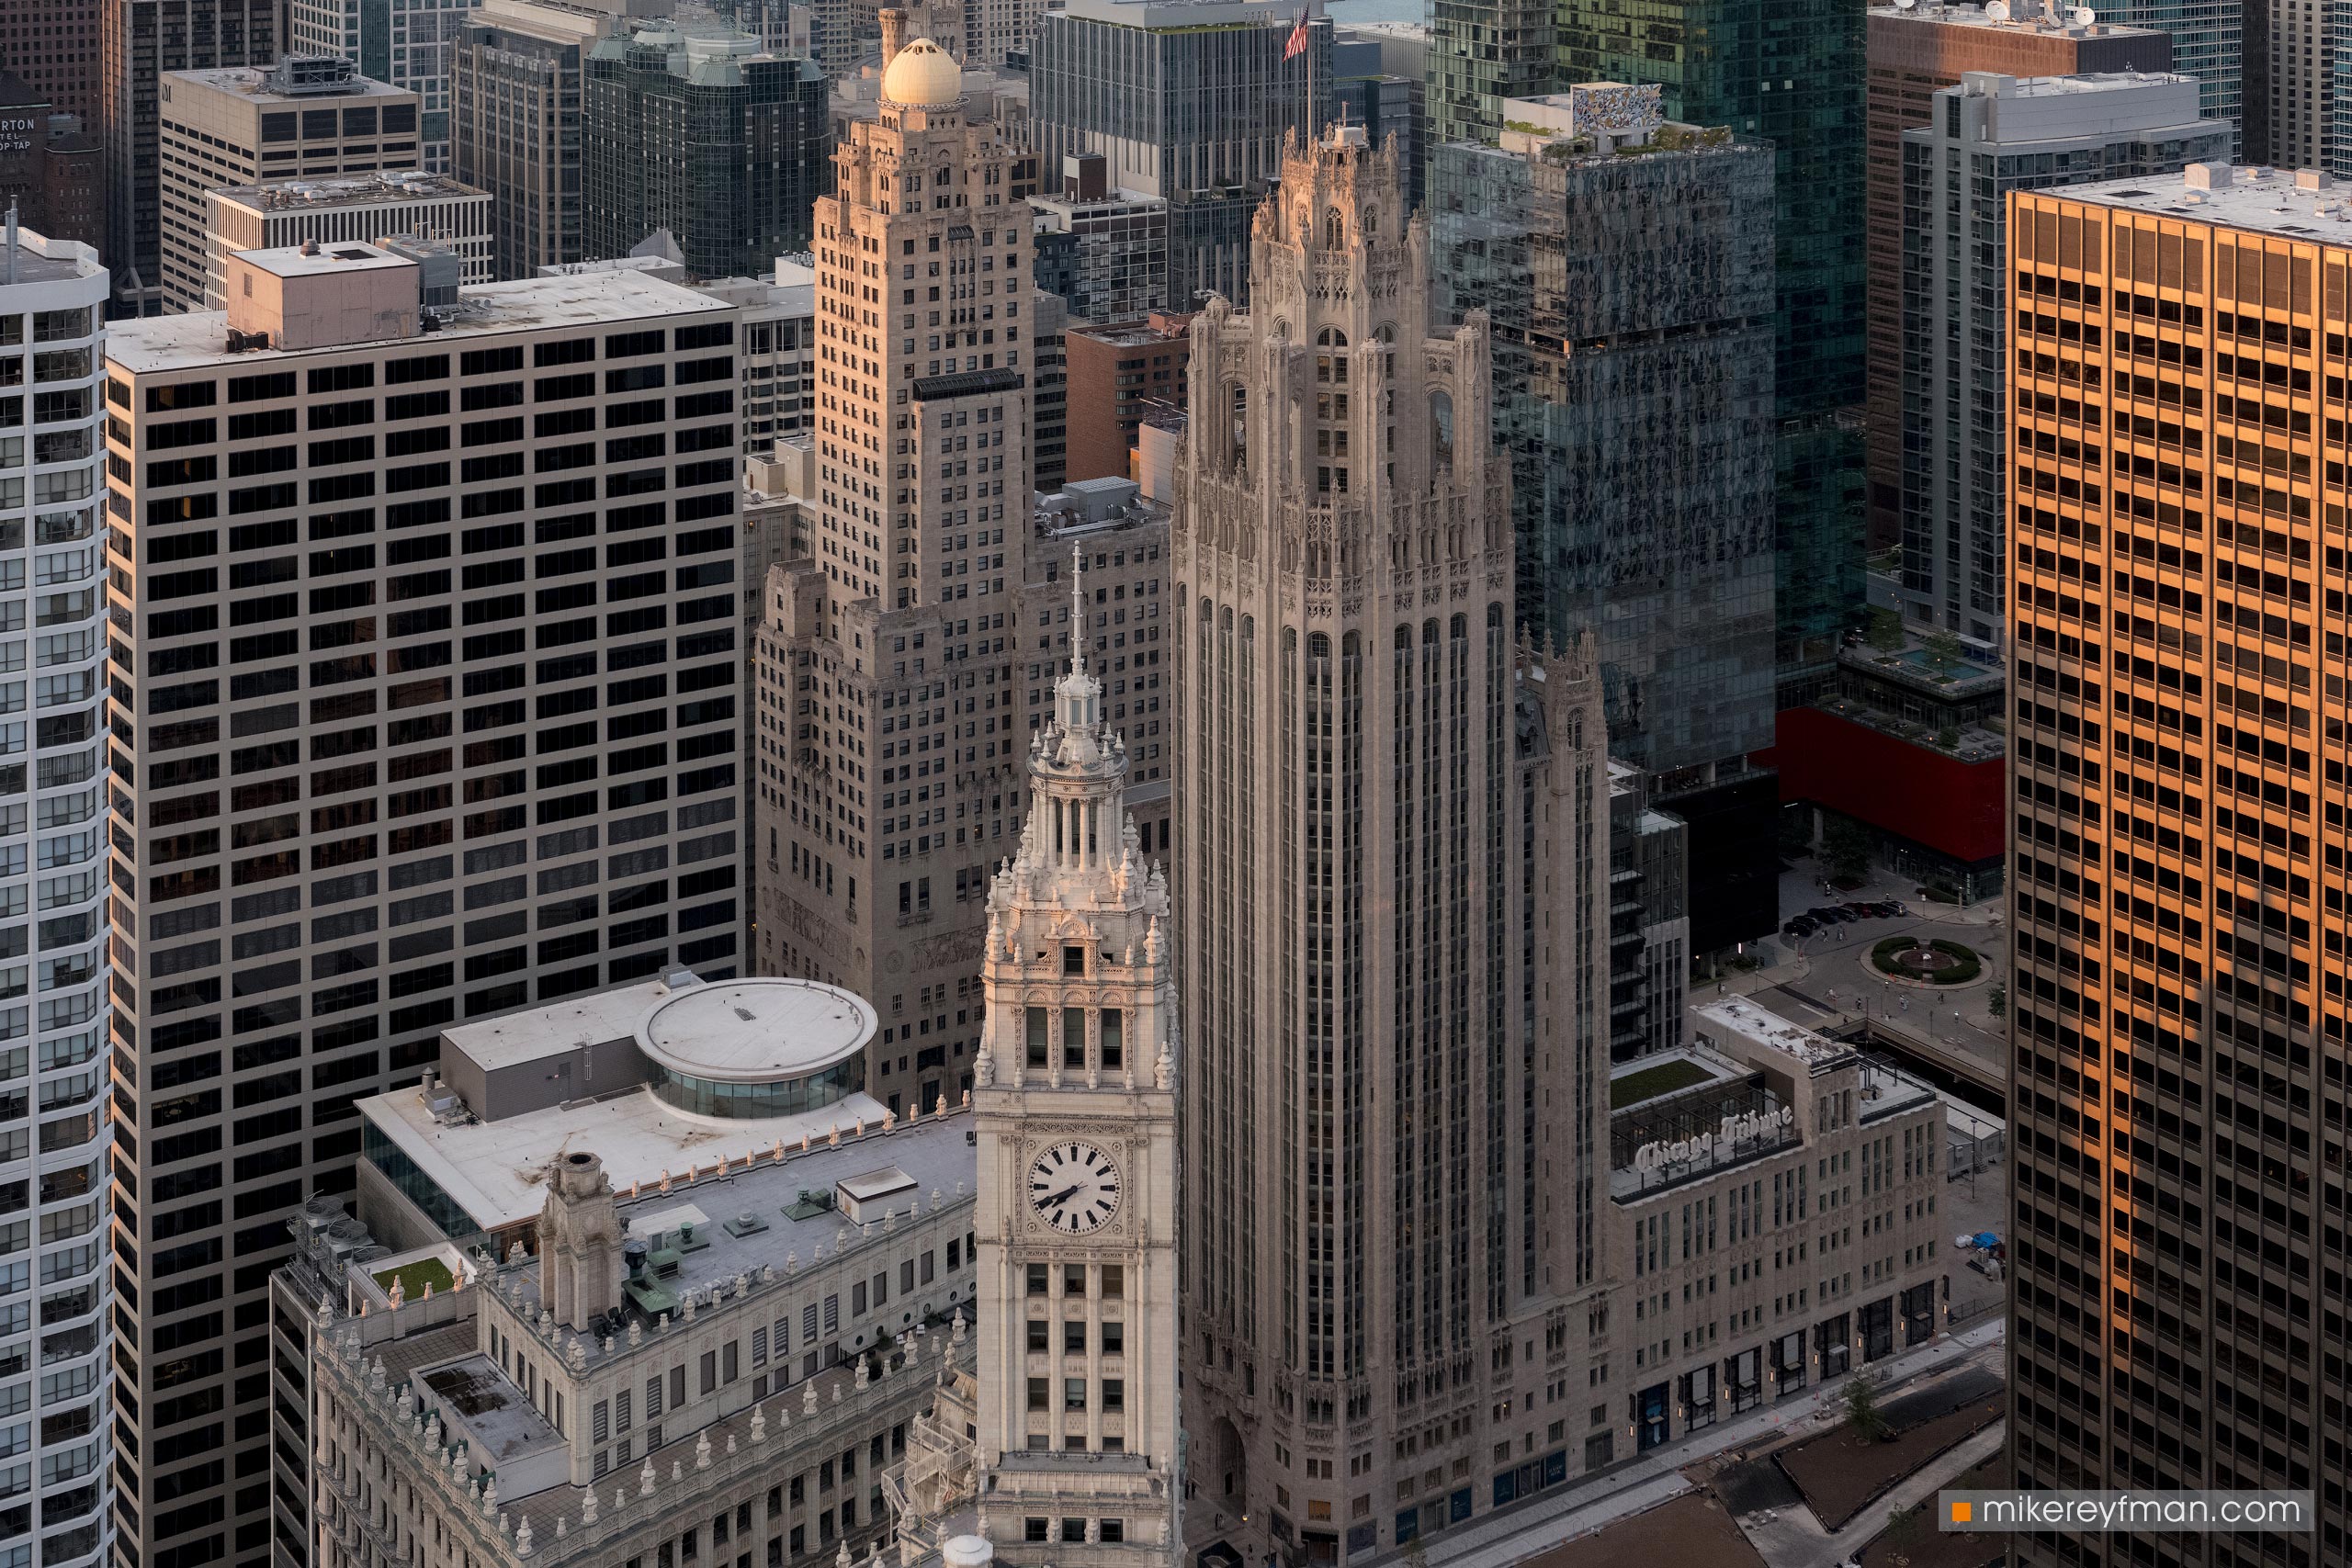 Chicago's Historic Skyscrapers: Wrigley Building, Tribune Tower, and Hotel Inter-Continental. Chicago, Illinois, USA 065-CH-2_ZRA10090 - Ever-beating architectural heart of America. The birthplace of the most iconic buildings in the country. - Mike Reyfman Photography